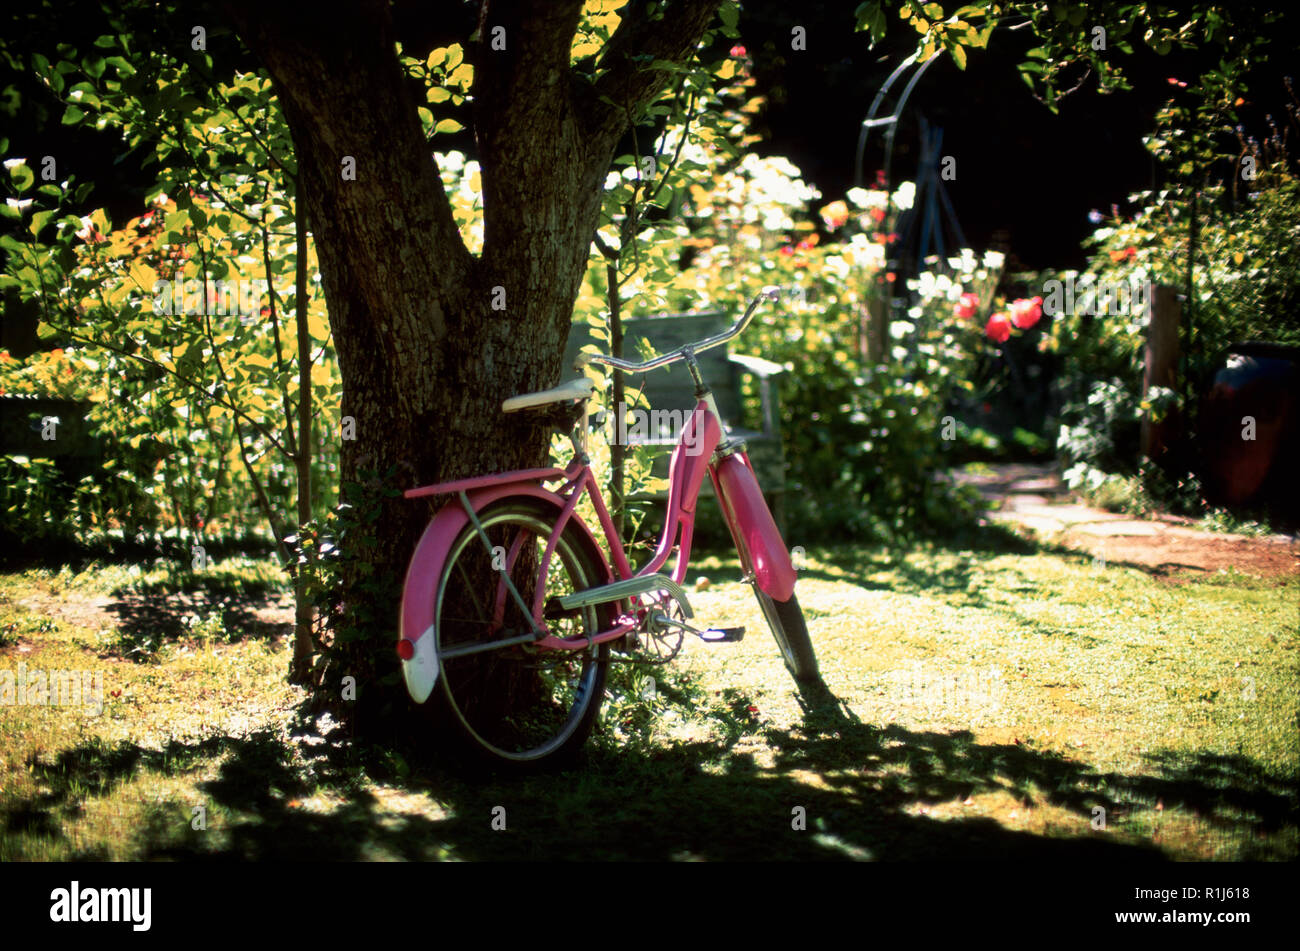 A bicycle is parked under a tree. Stock Photo